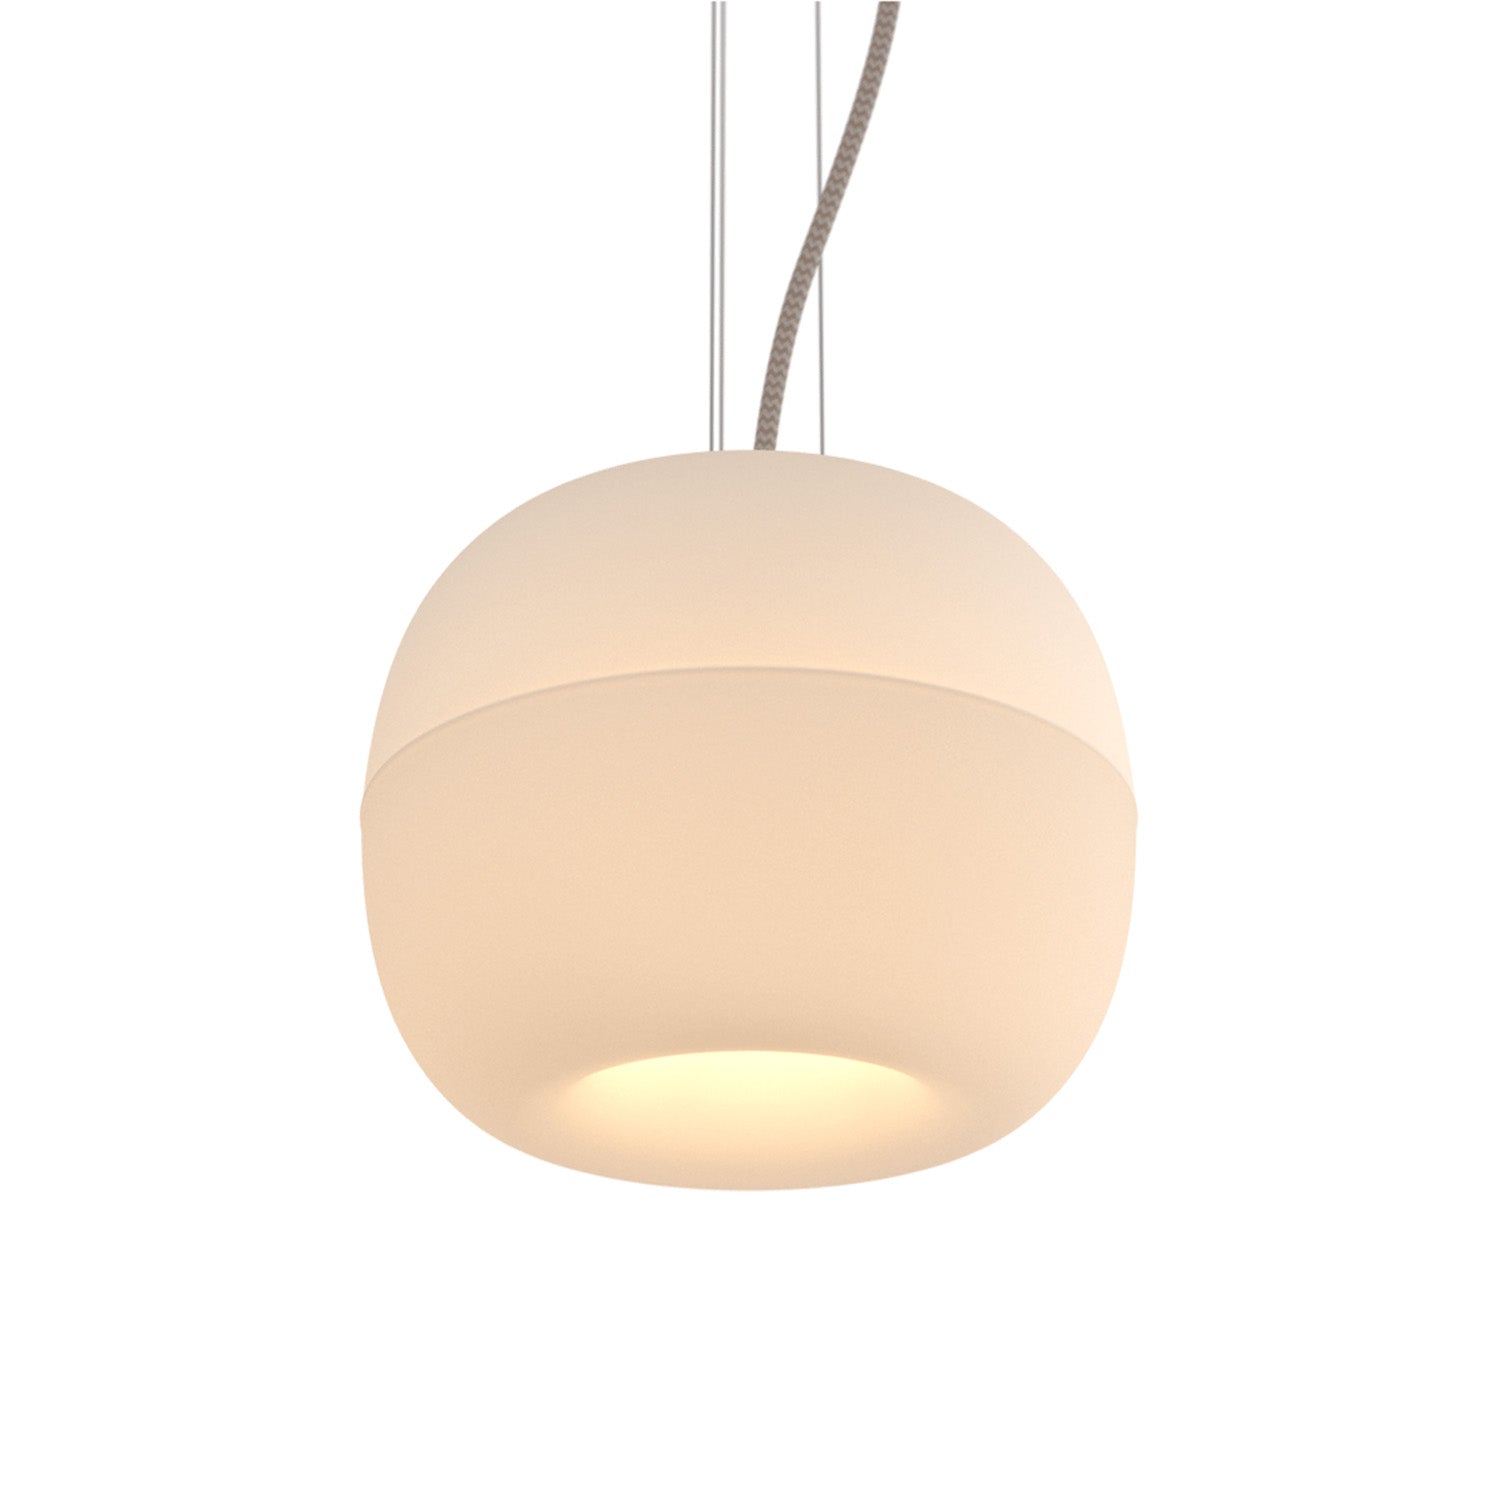 MALUS - Blown glass pendant light, cocooning and elegant